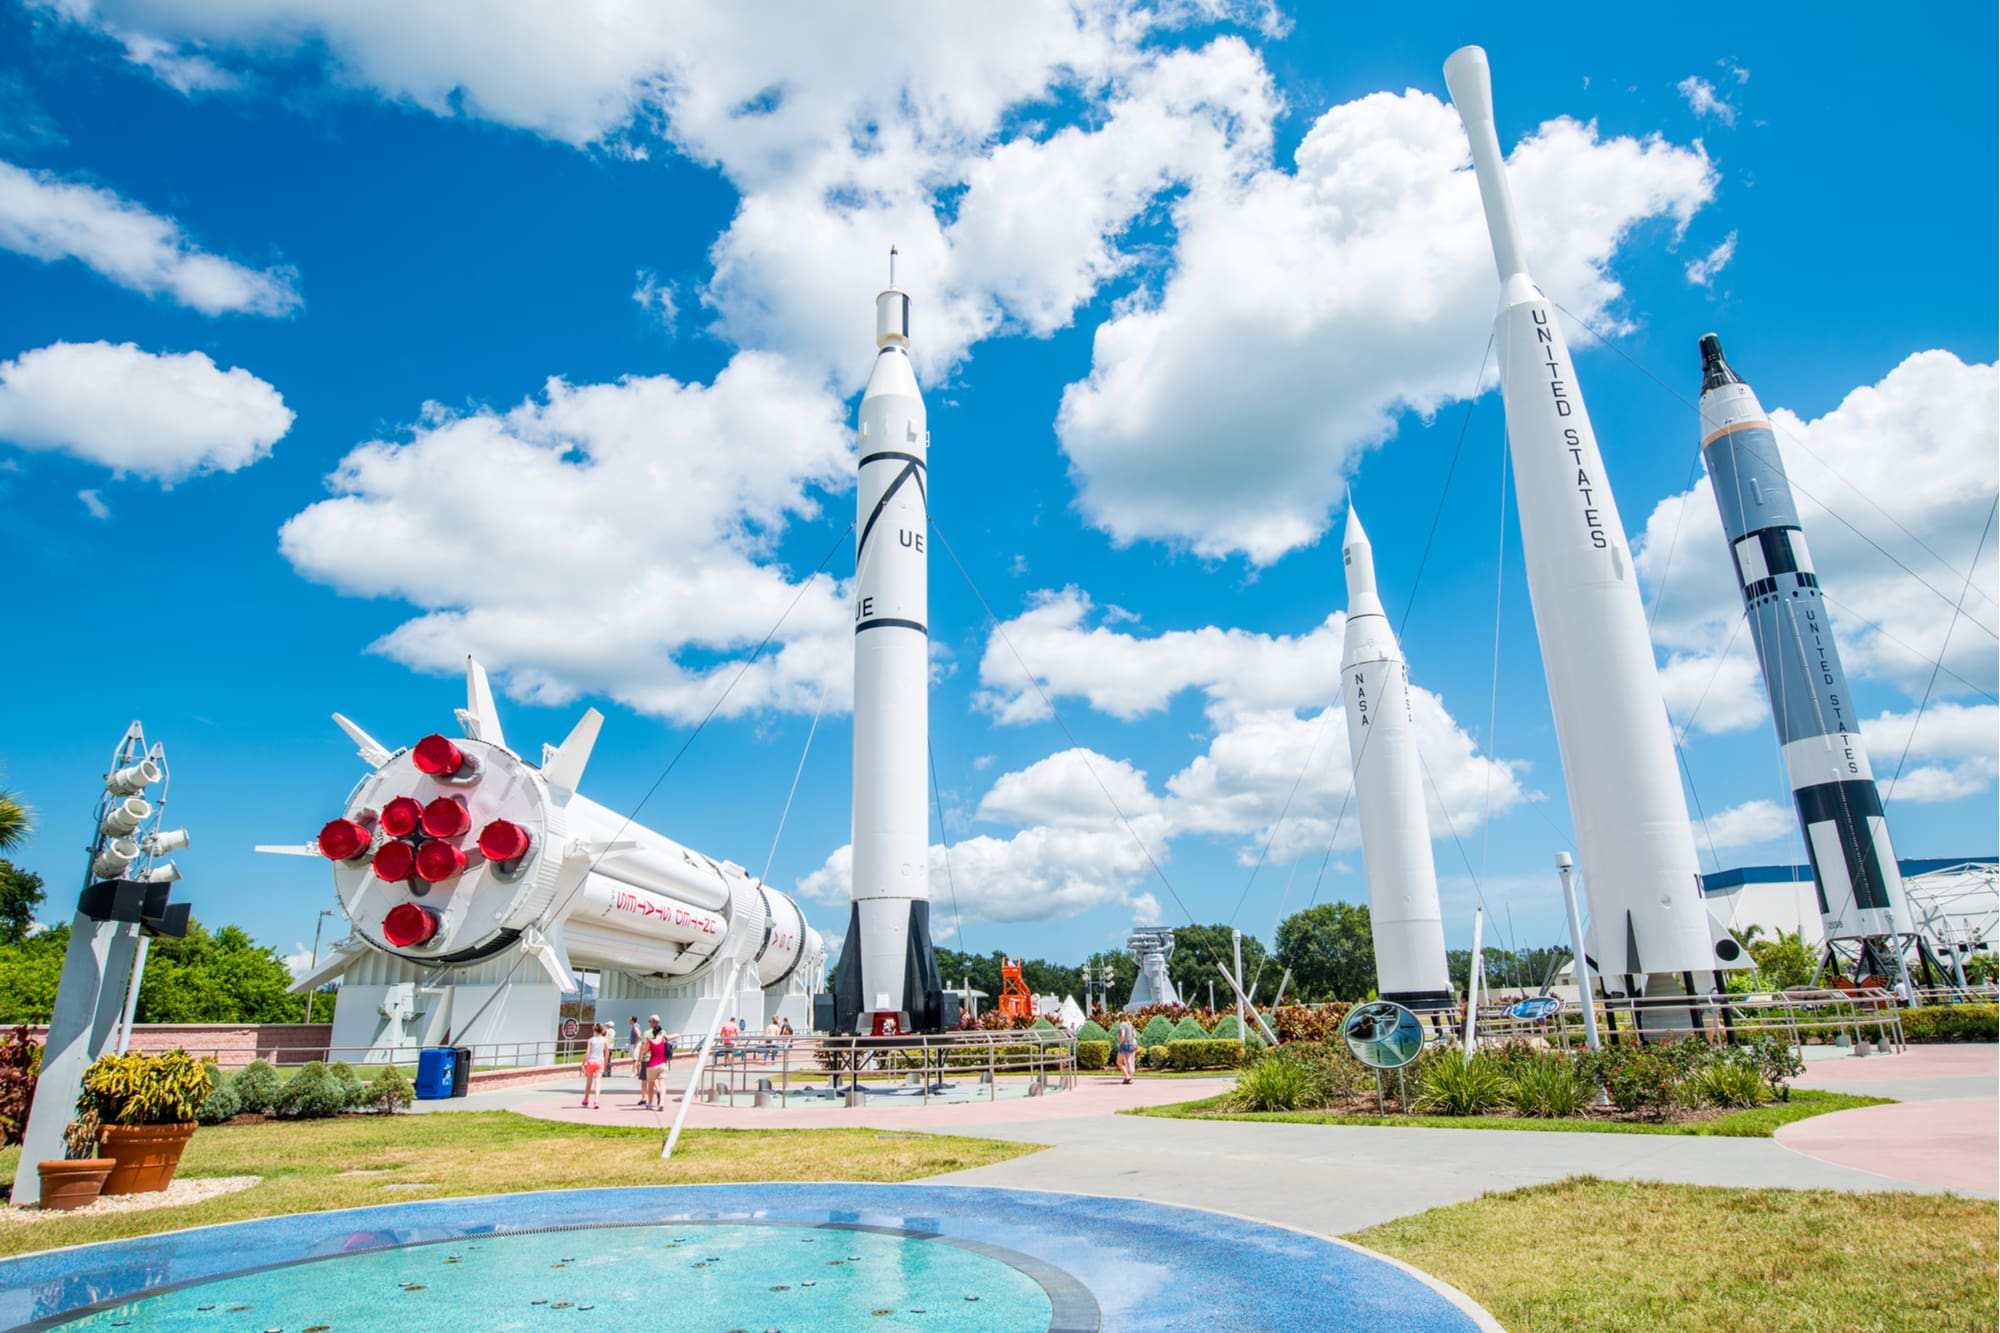 see-space-launches-at-these-campgrounds-near-launch-locations